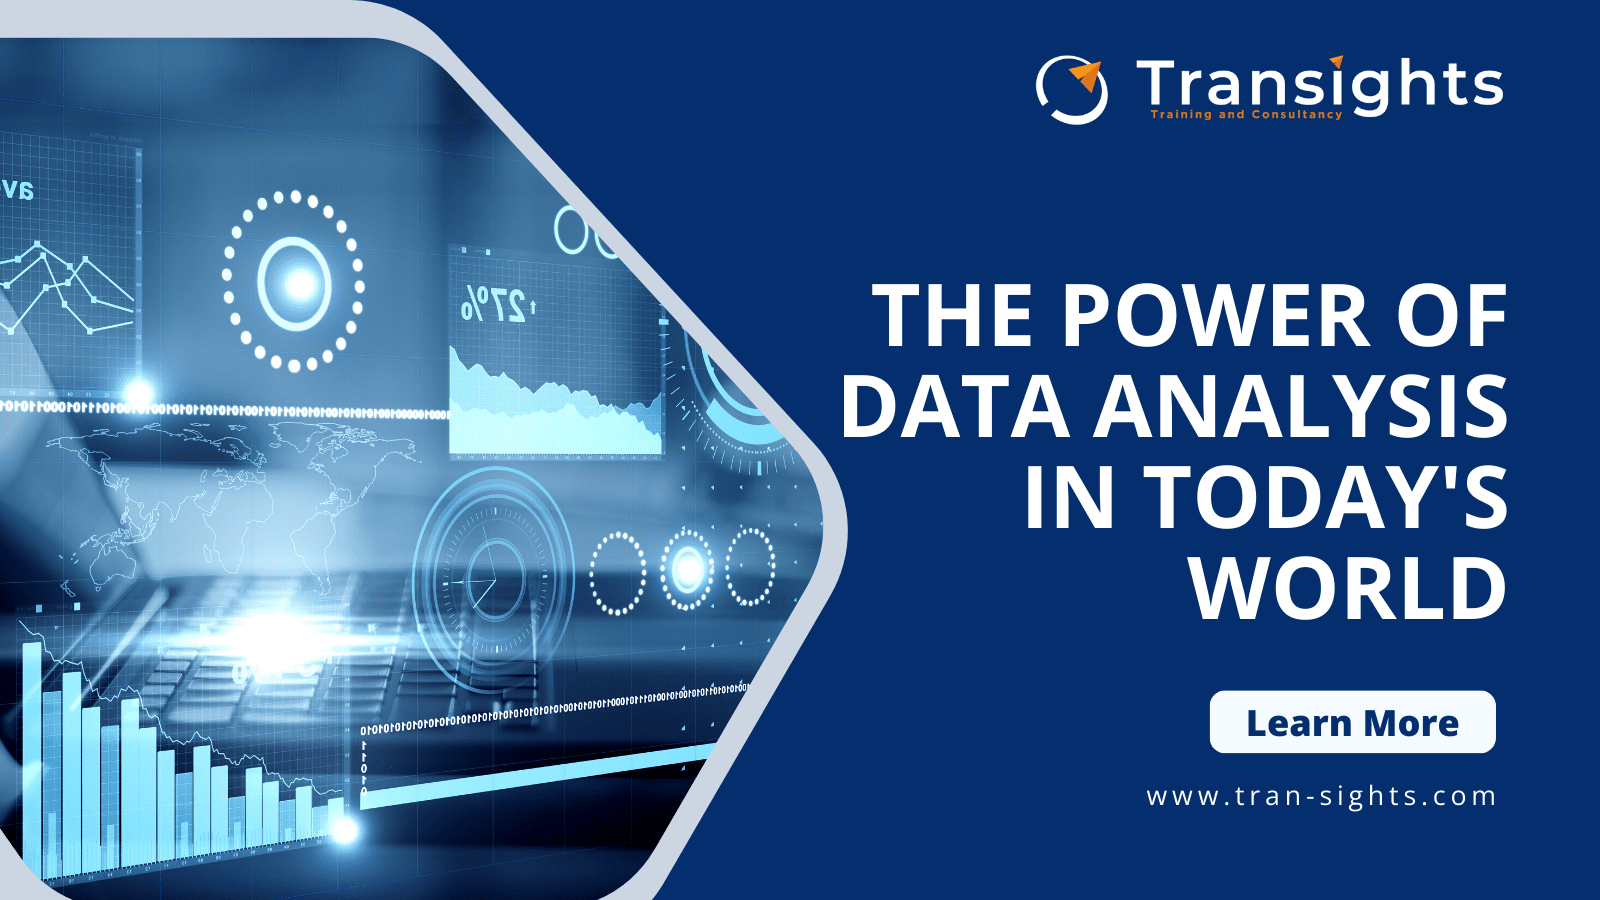 The Power of Data Analysis in Today's World